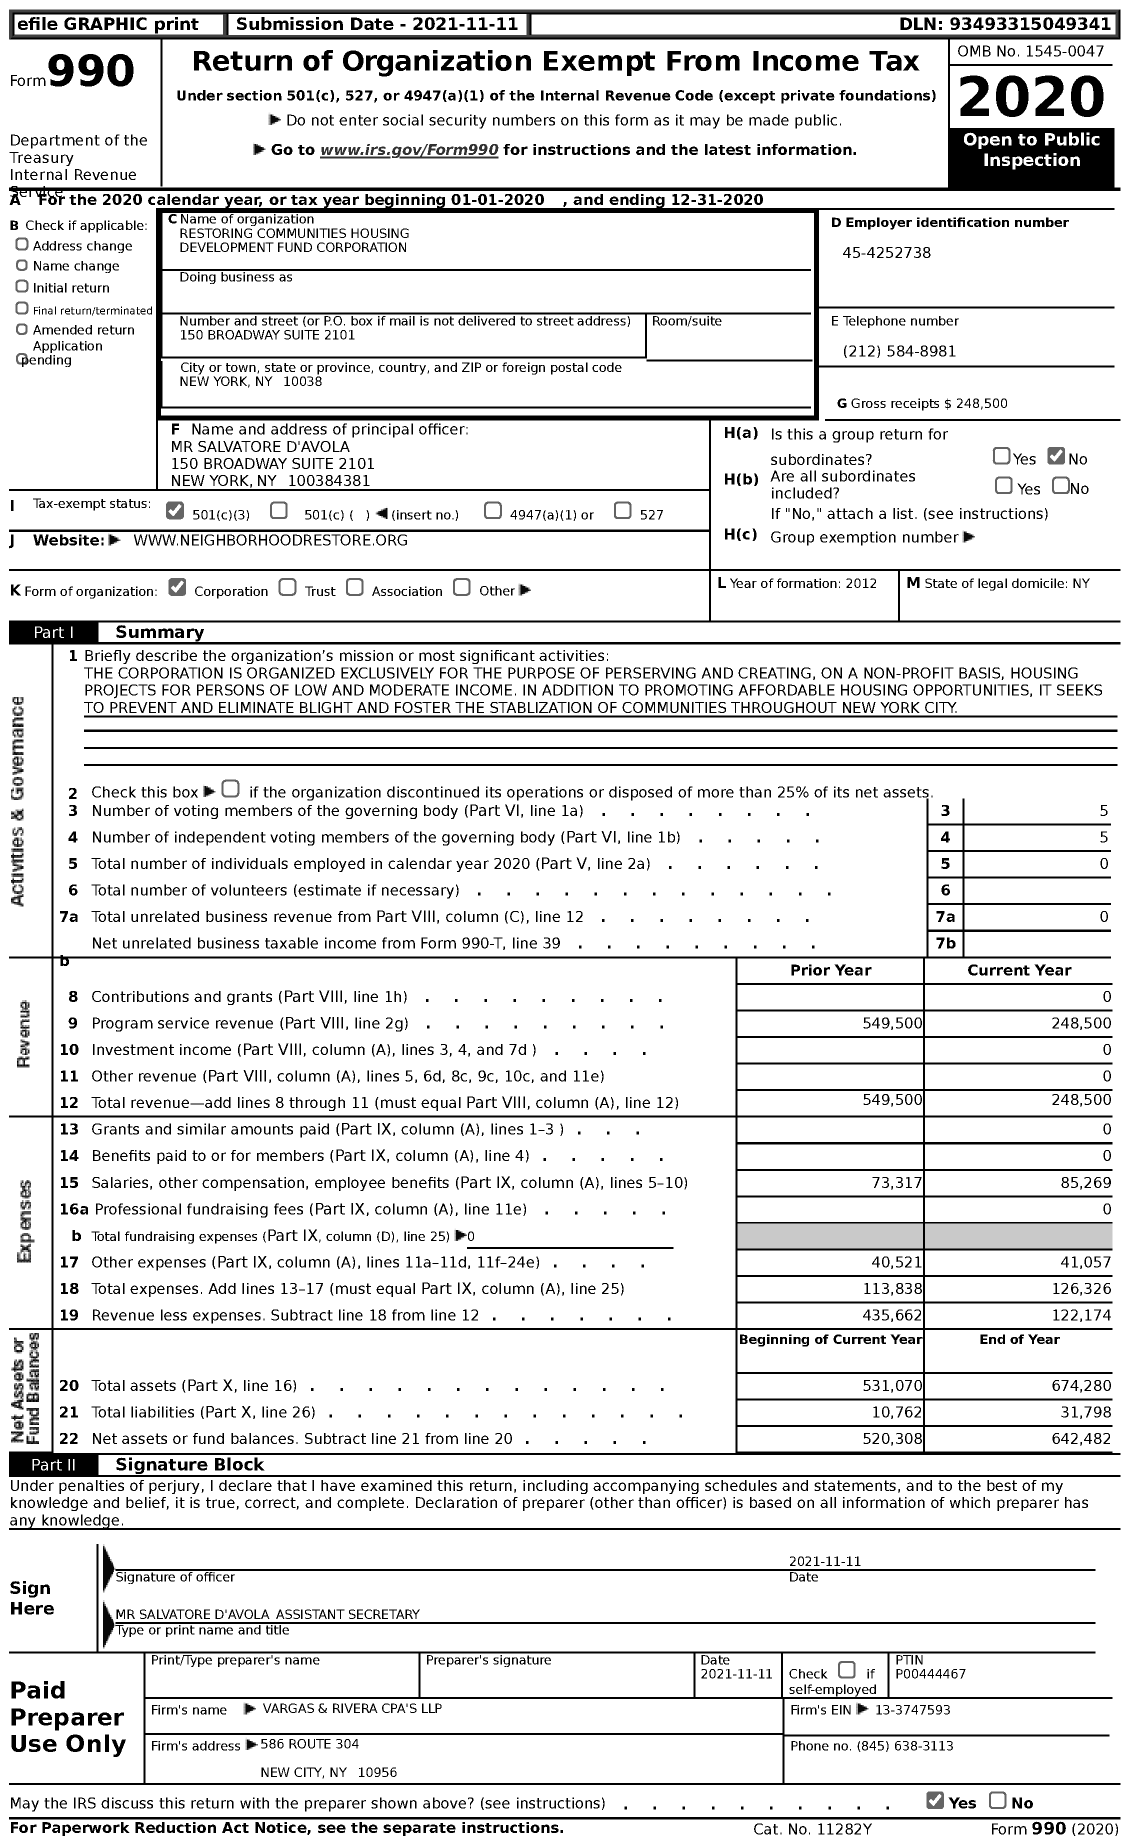 Image of first page of 2020 Form 990 for Restoring Communities Housing Development Fund Corporation